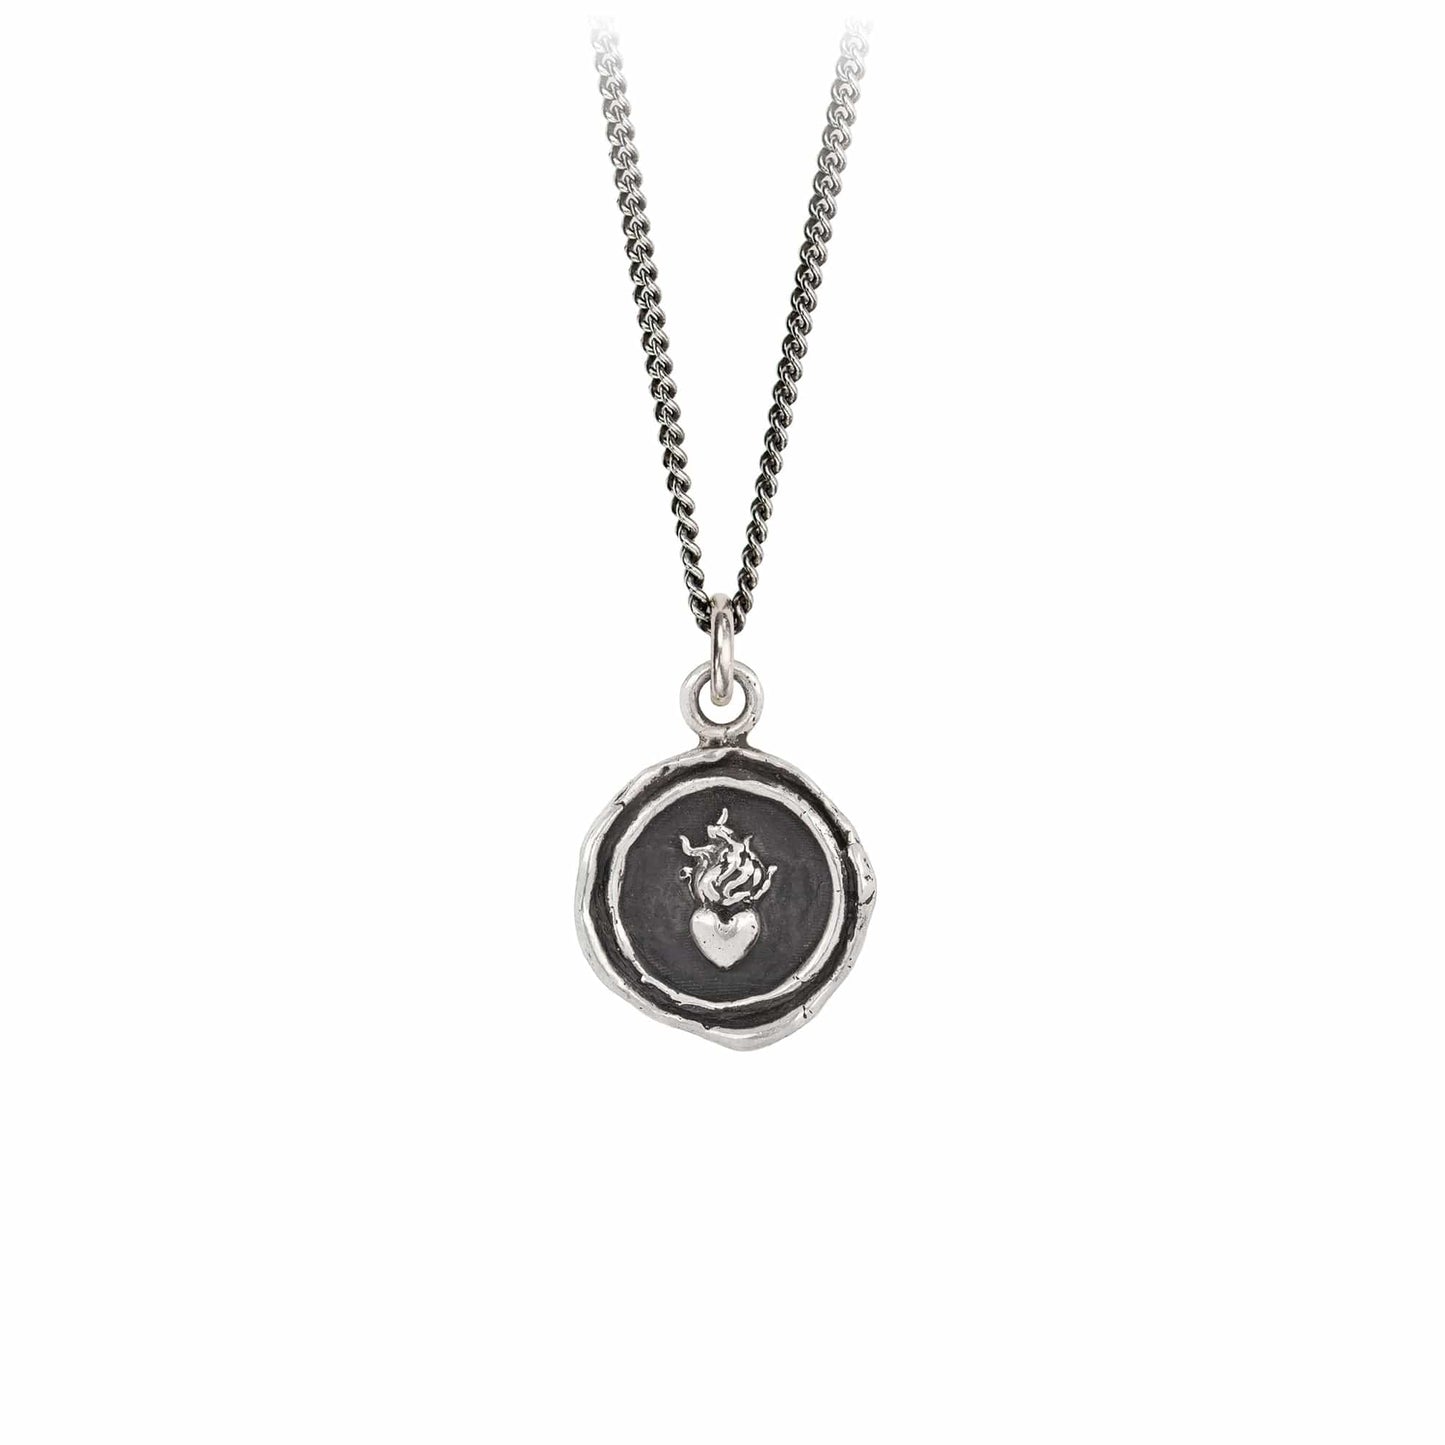 NKL Flaming Heart Talisman Necklace